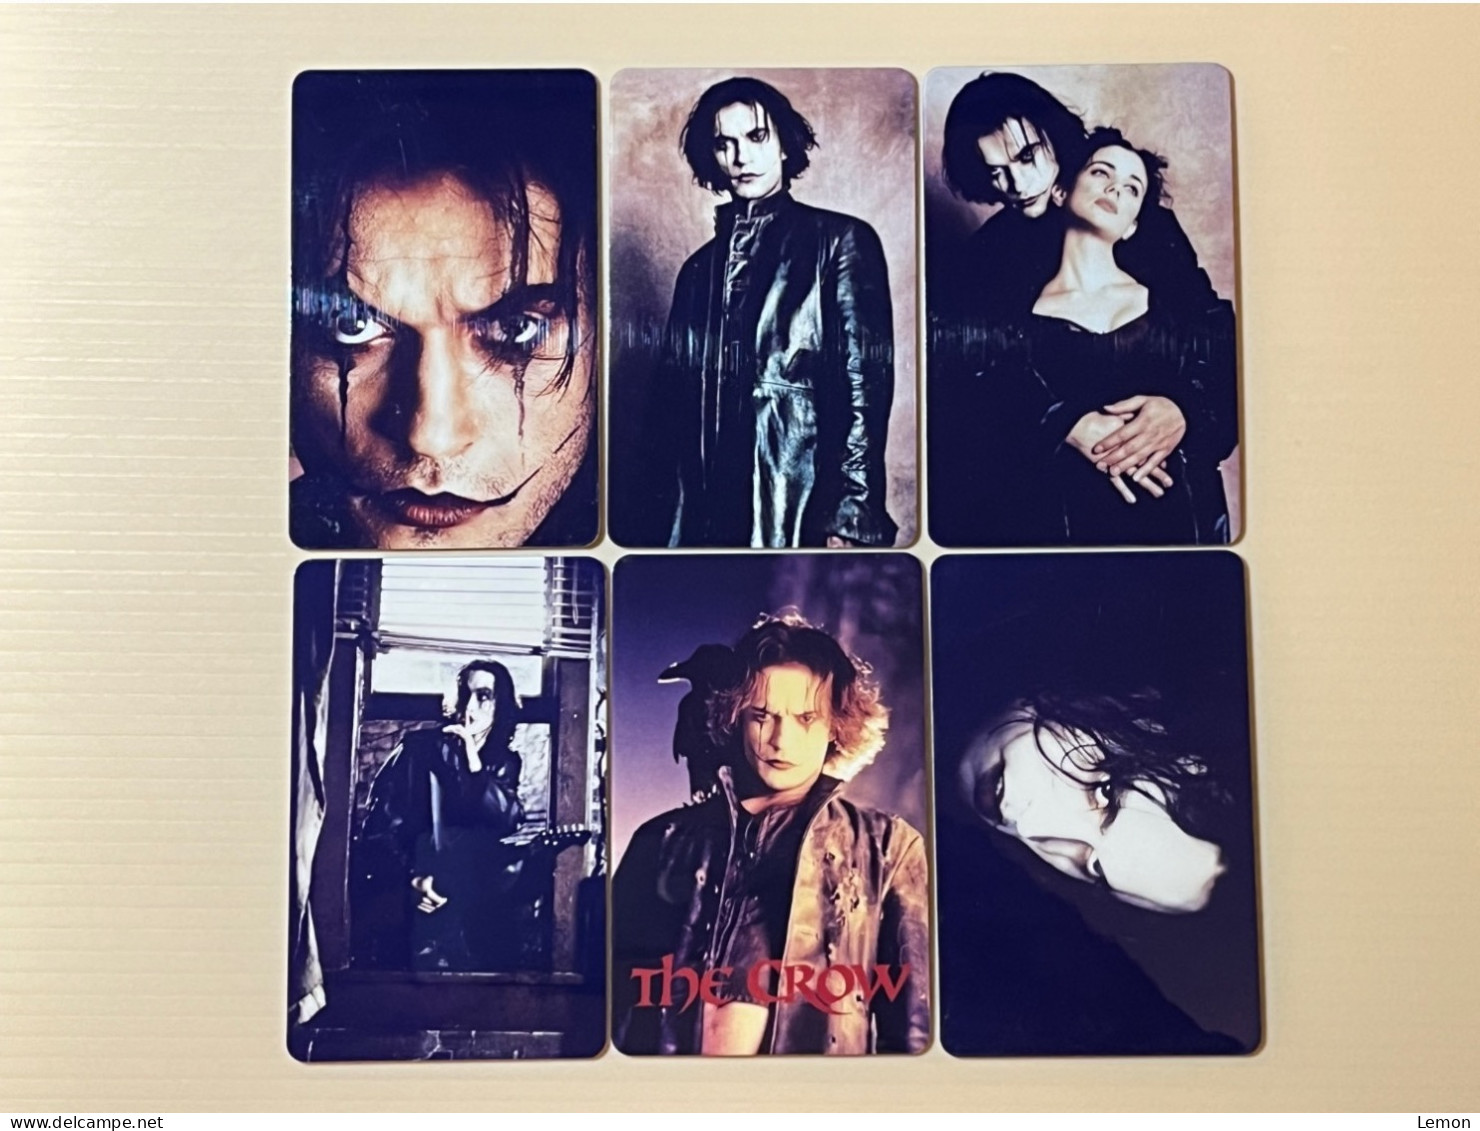 Mint USA UNITED STATES America Prepaid Telecard Phonecard, The Crow, Set Of 5 Mint Cards & 1 Used Card - Colecciones